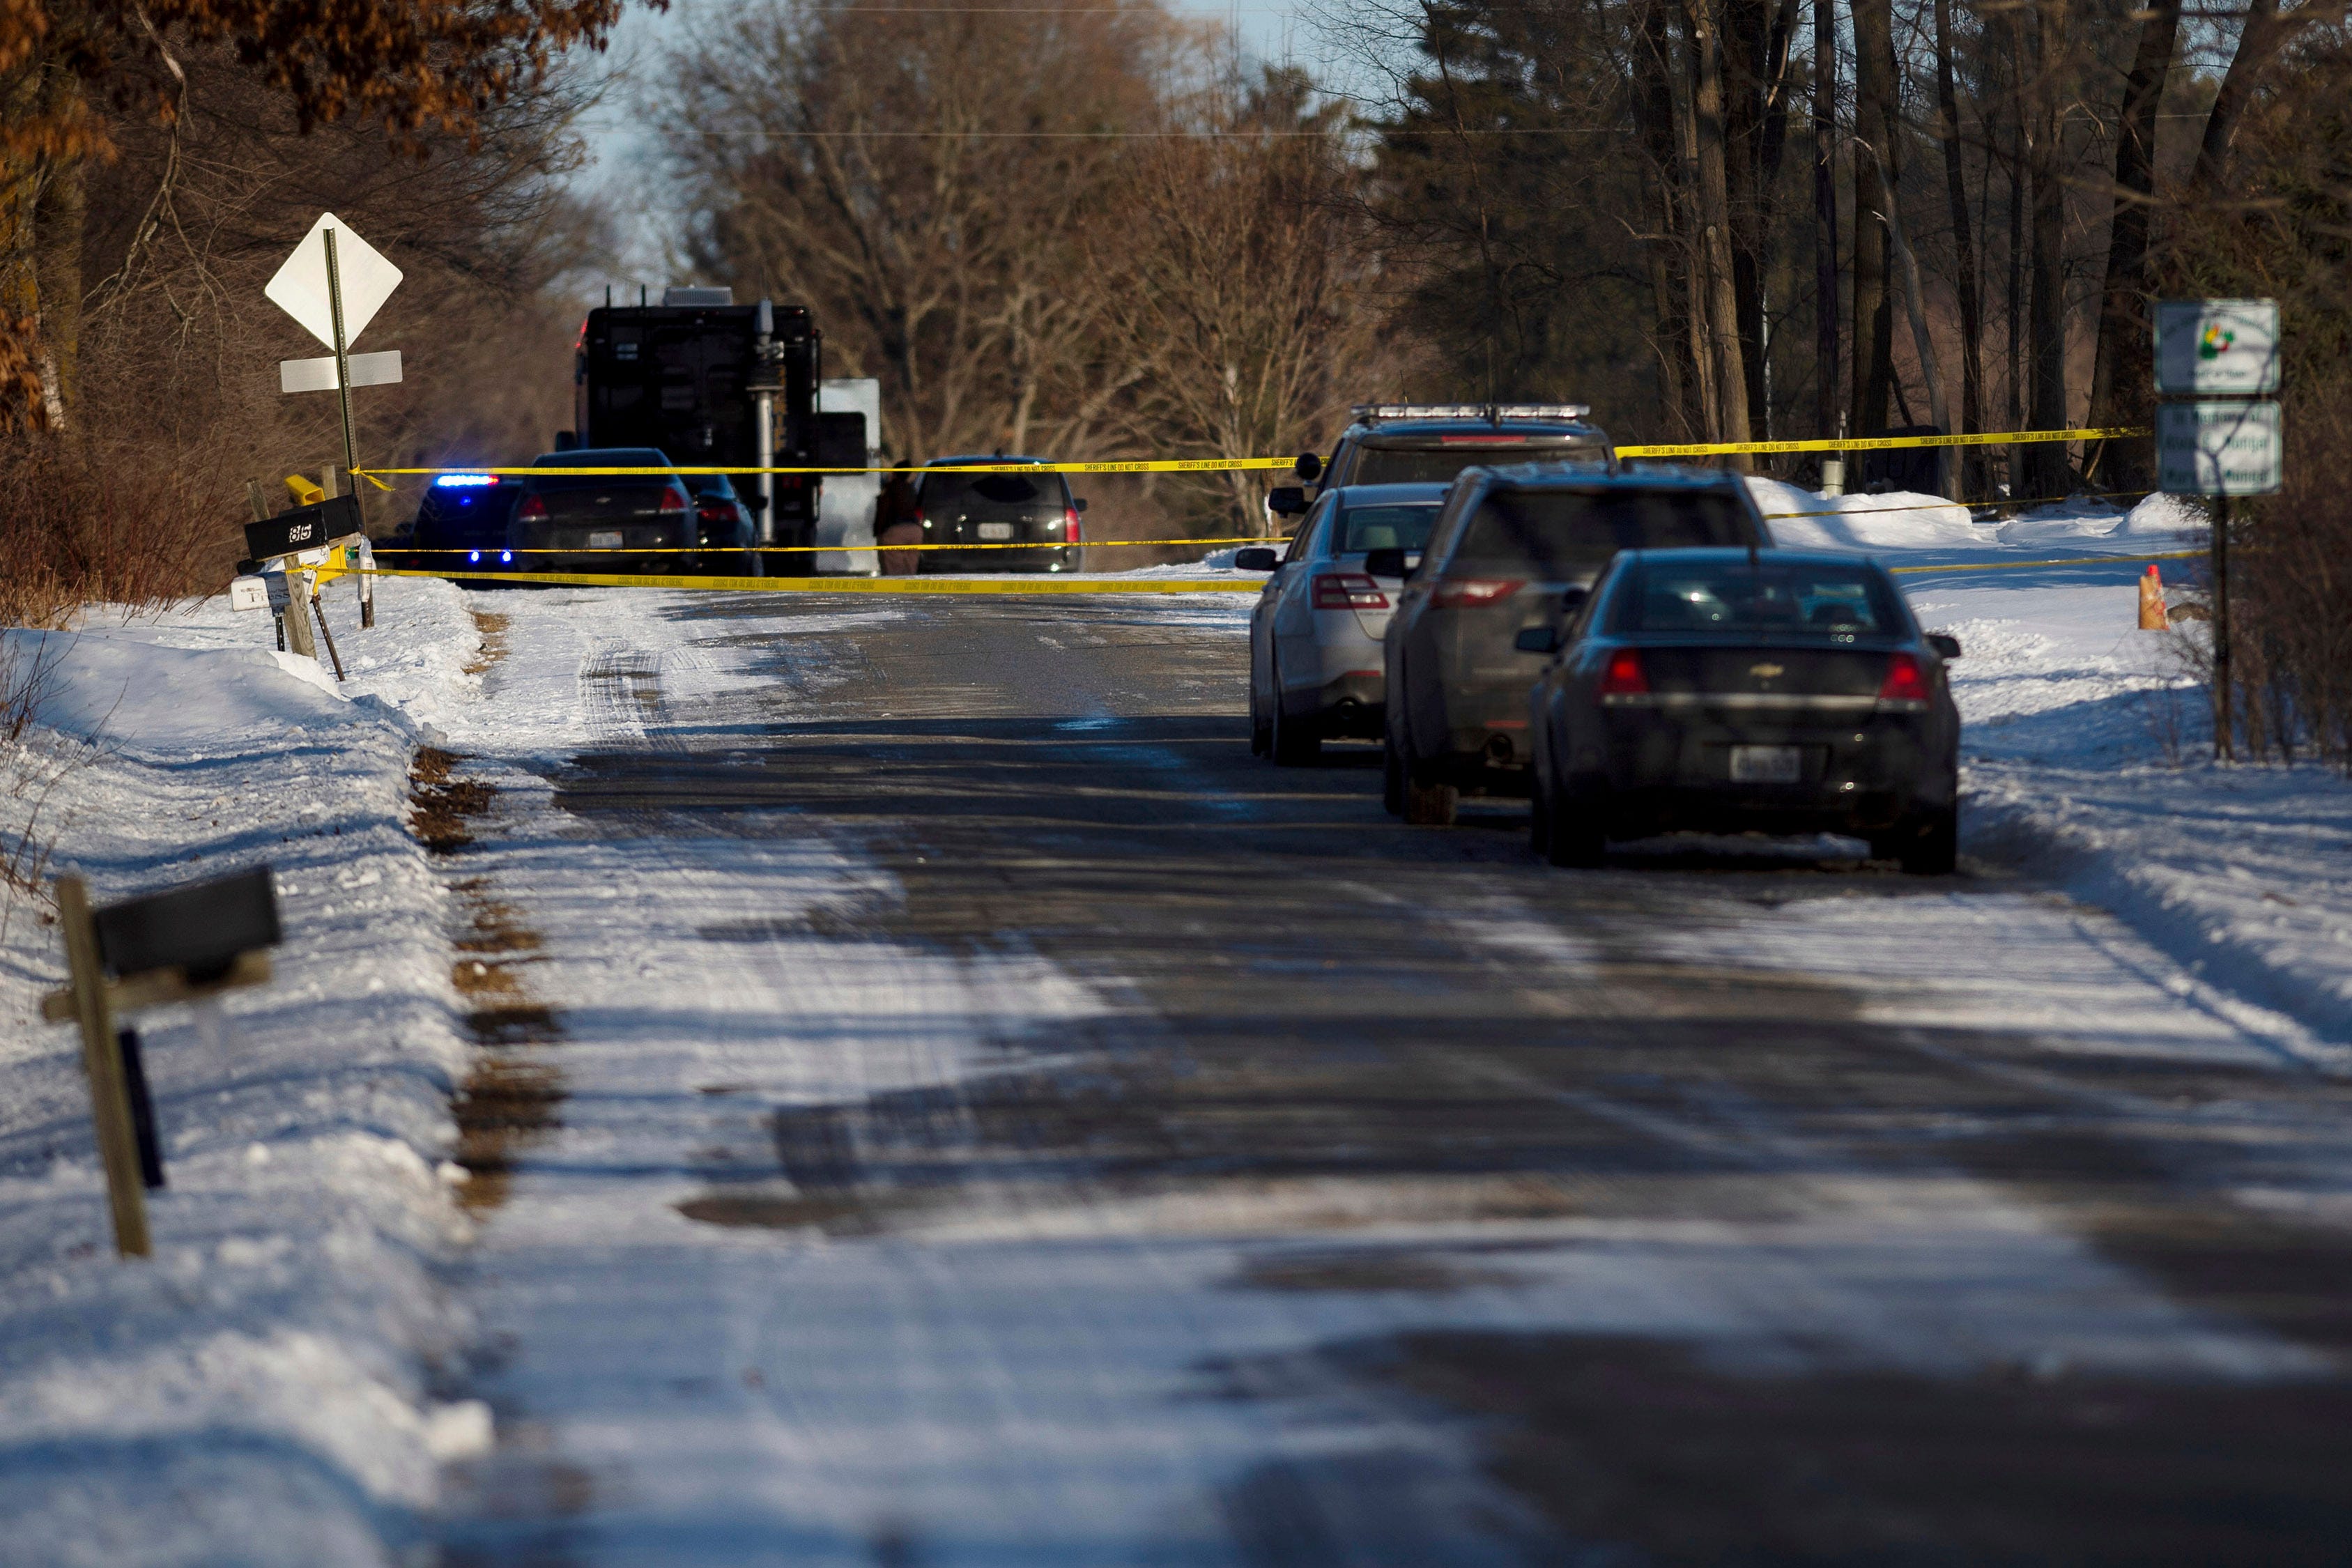 Kent County Sheriff personnel investigate the scene of a fatal shooting on Monday, Feb. 18, 2019, near Cedar Springs, Michigan.